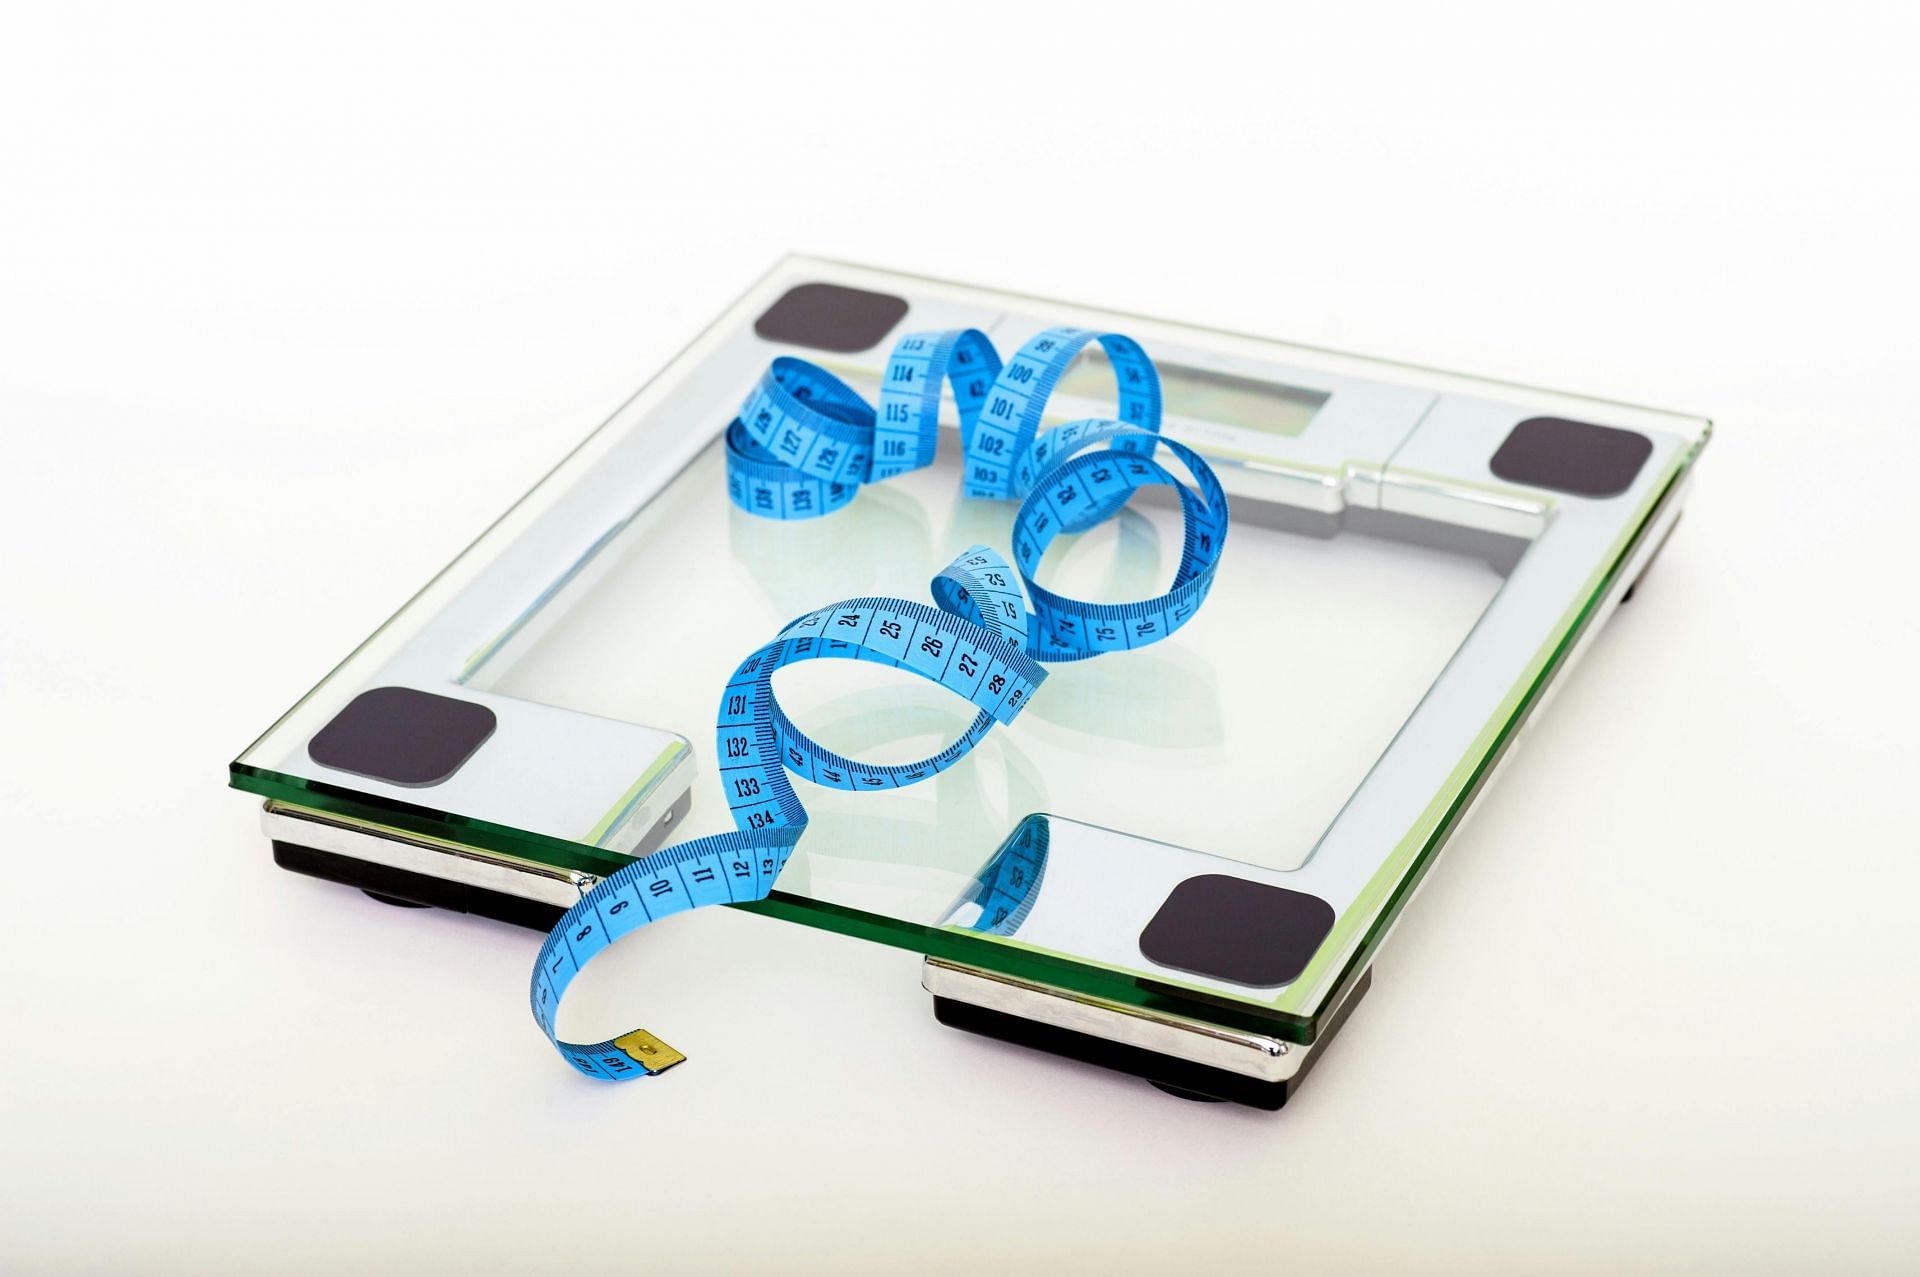 Reasons behind gaining weight fast (image sourced via Pexels / Photo by pixabay)